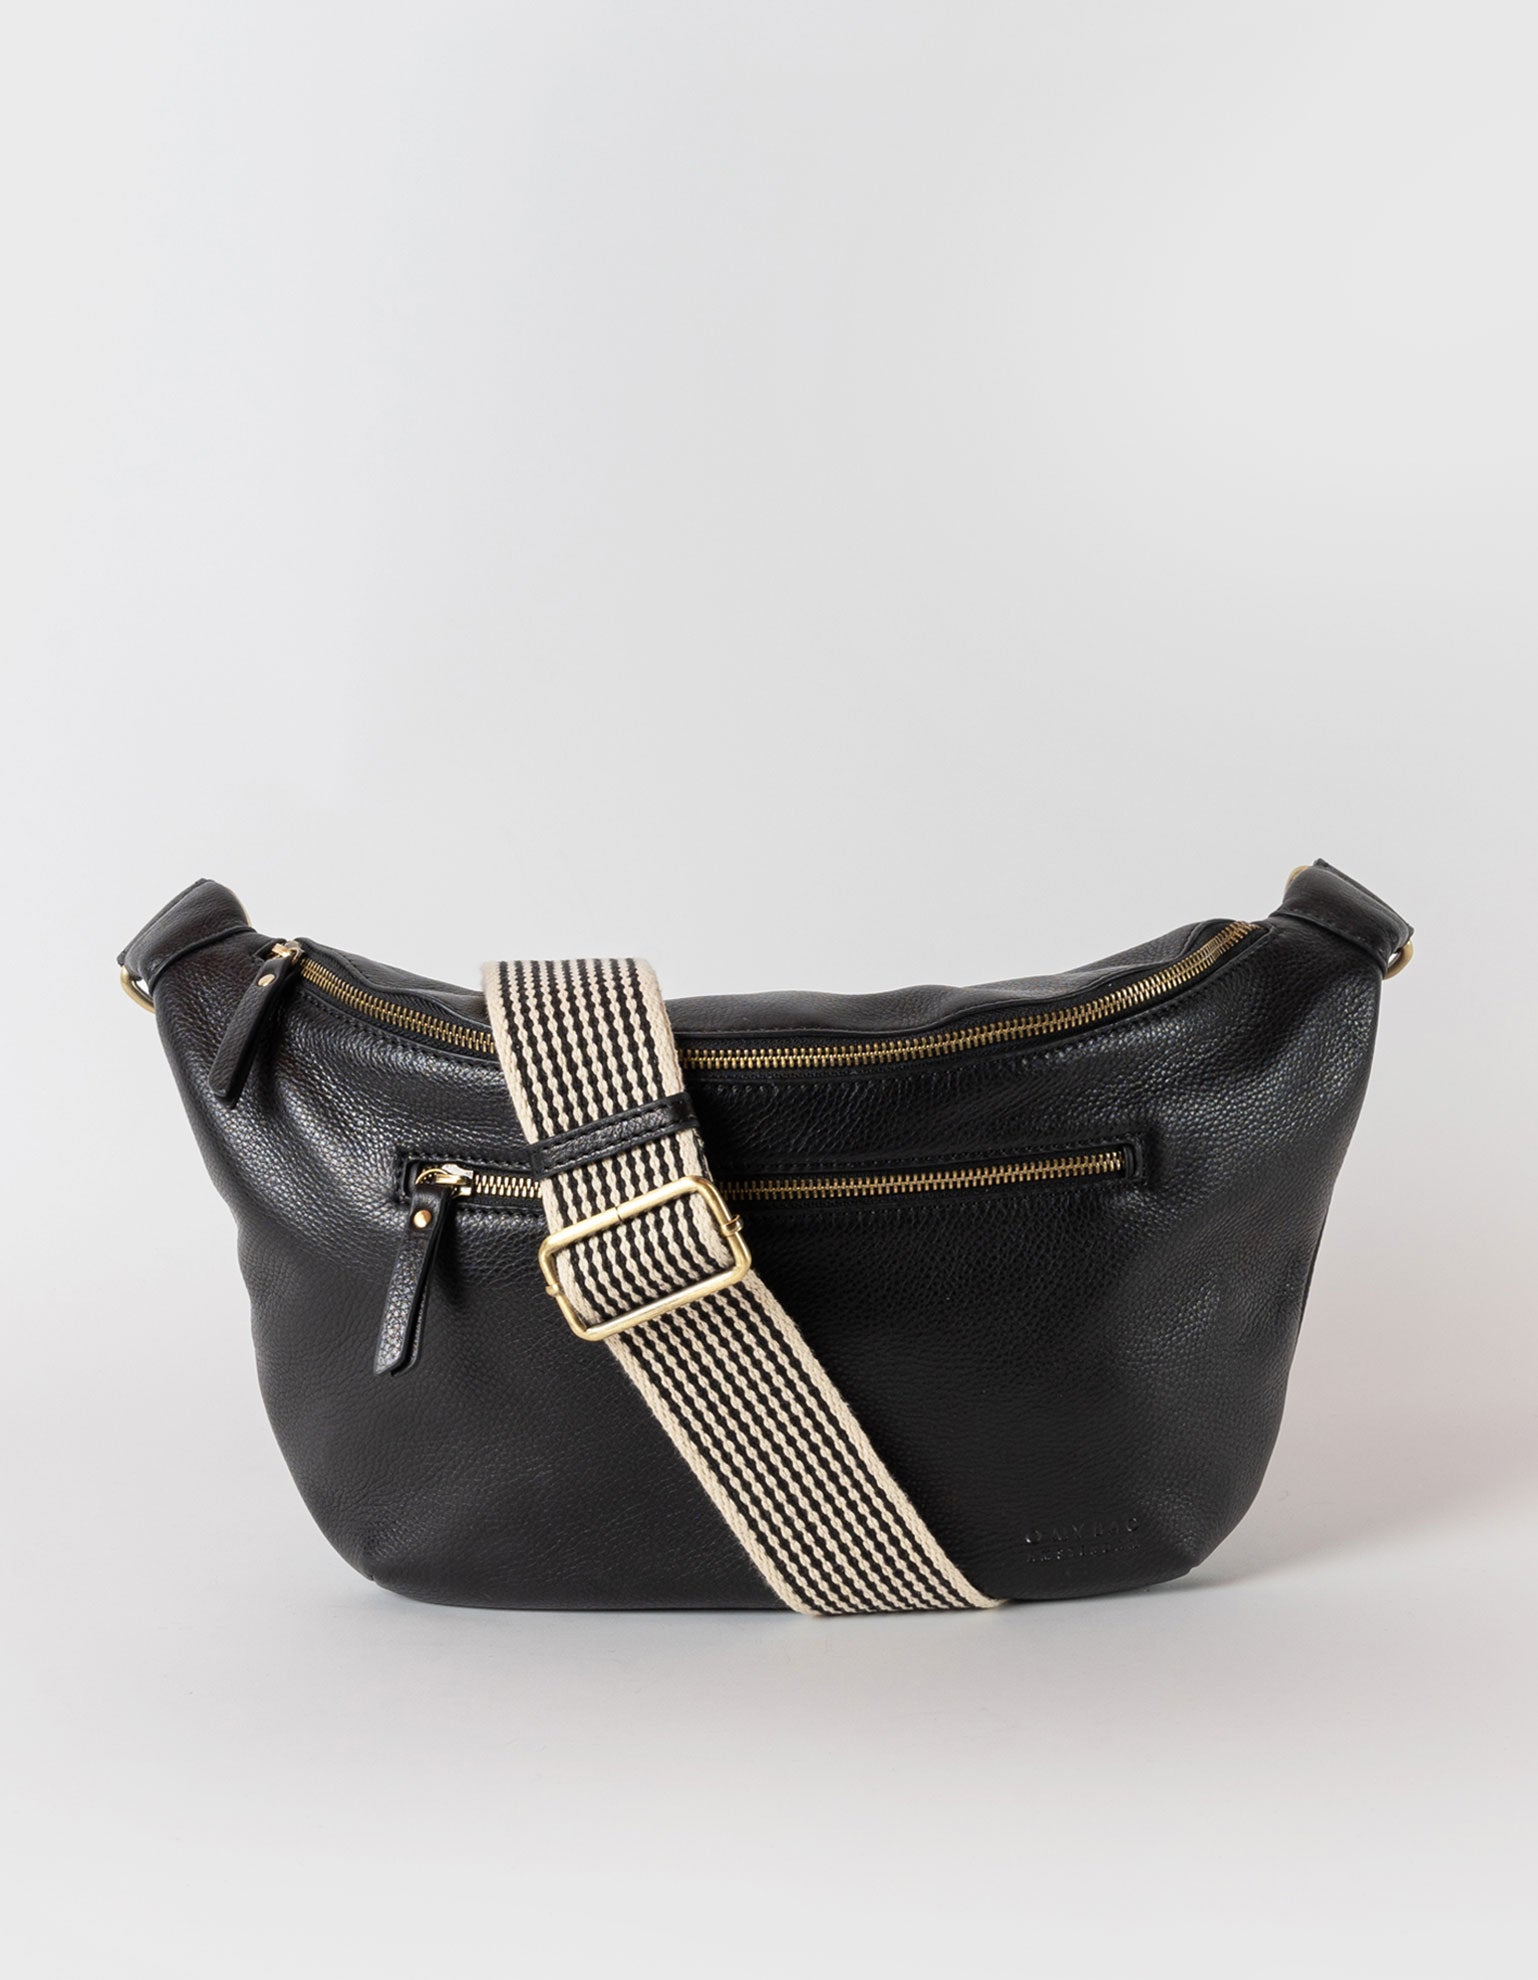 Drew Maxi in black soft grain leather with checkered webbing strap. Front product image.